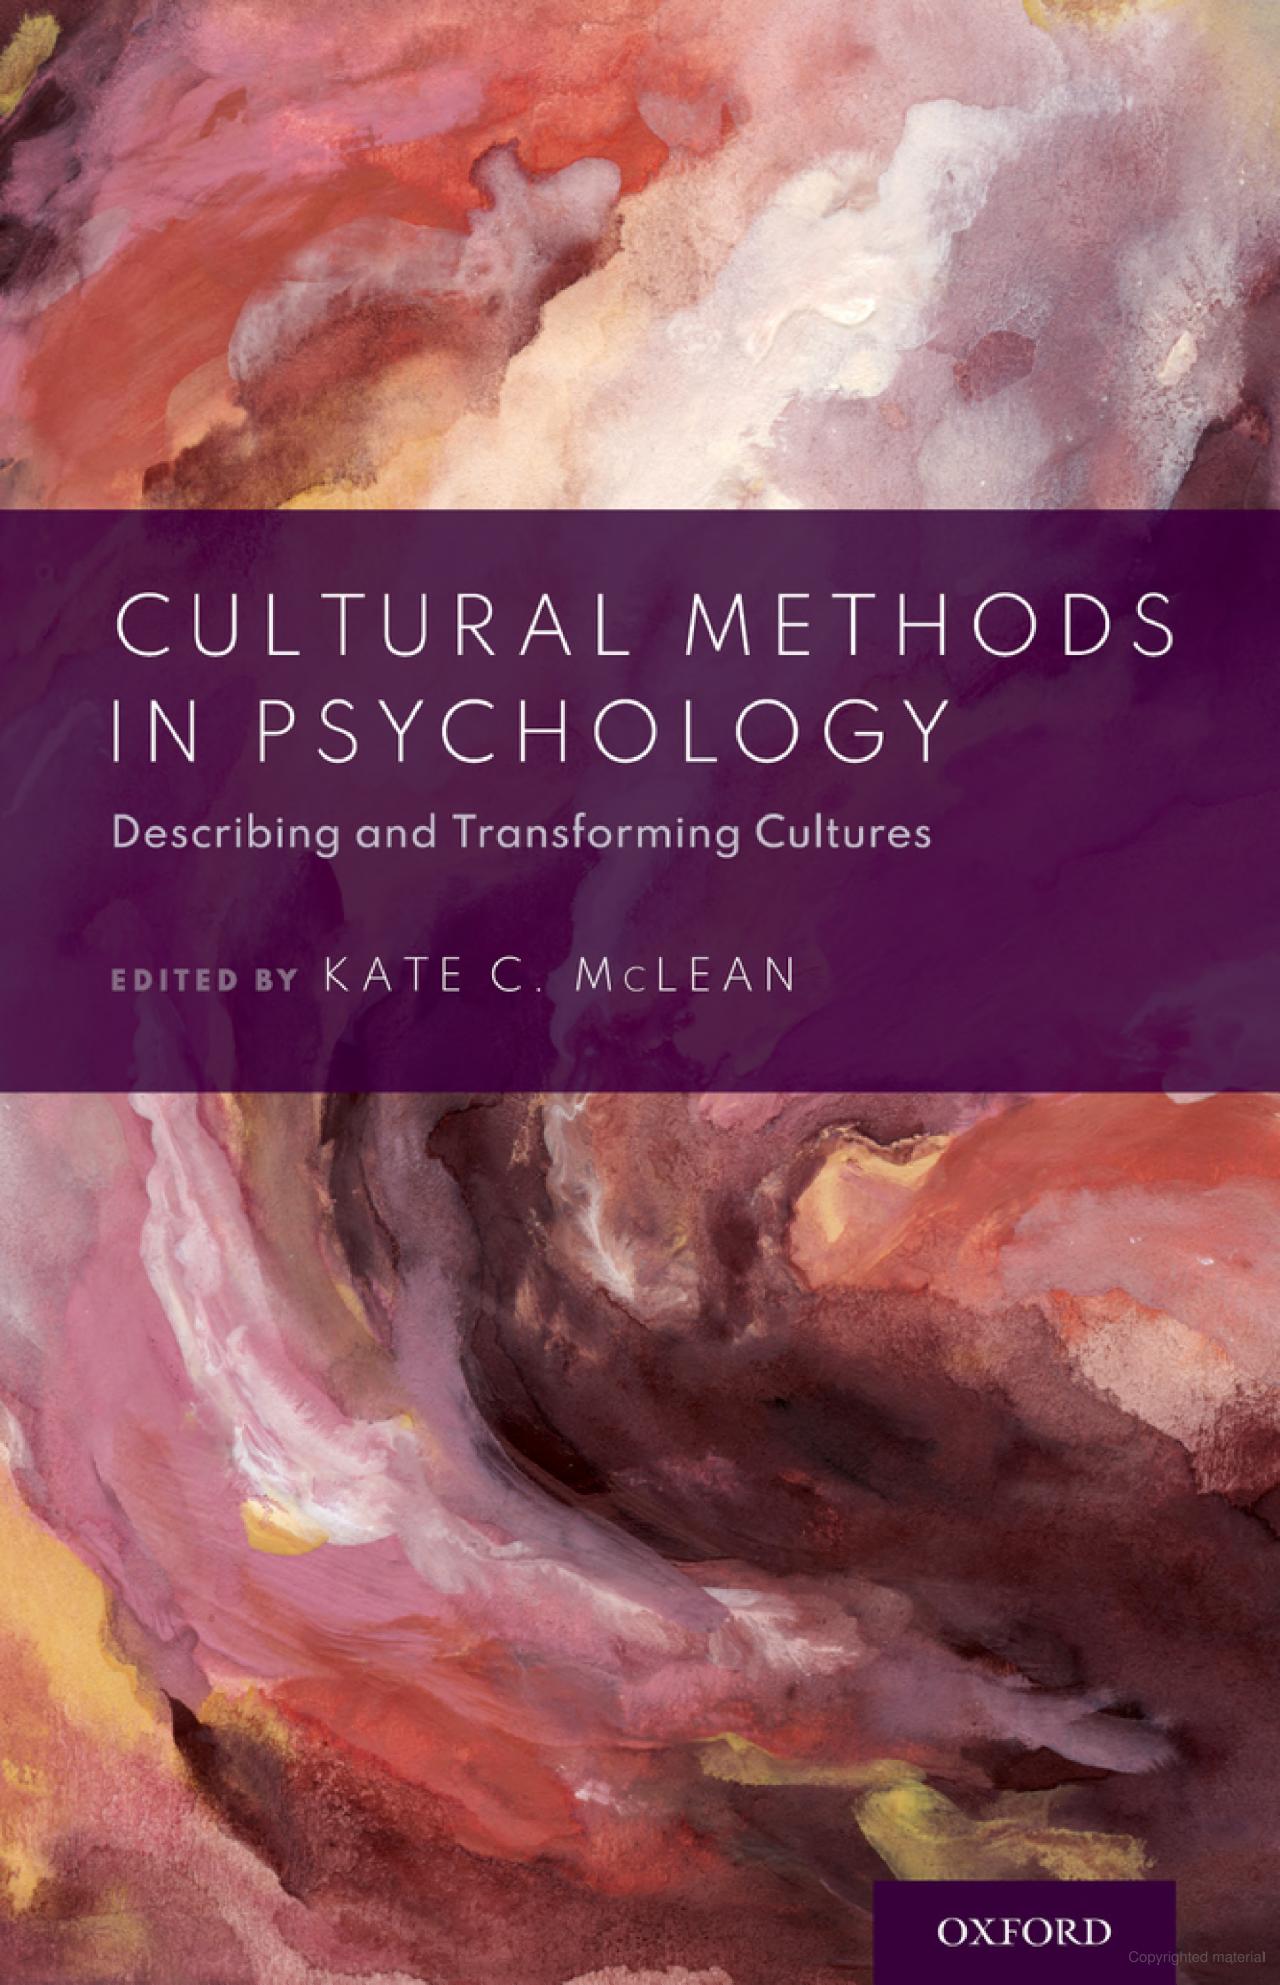 Cultural Methods in Psychology text